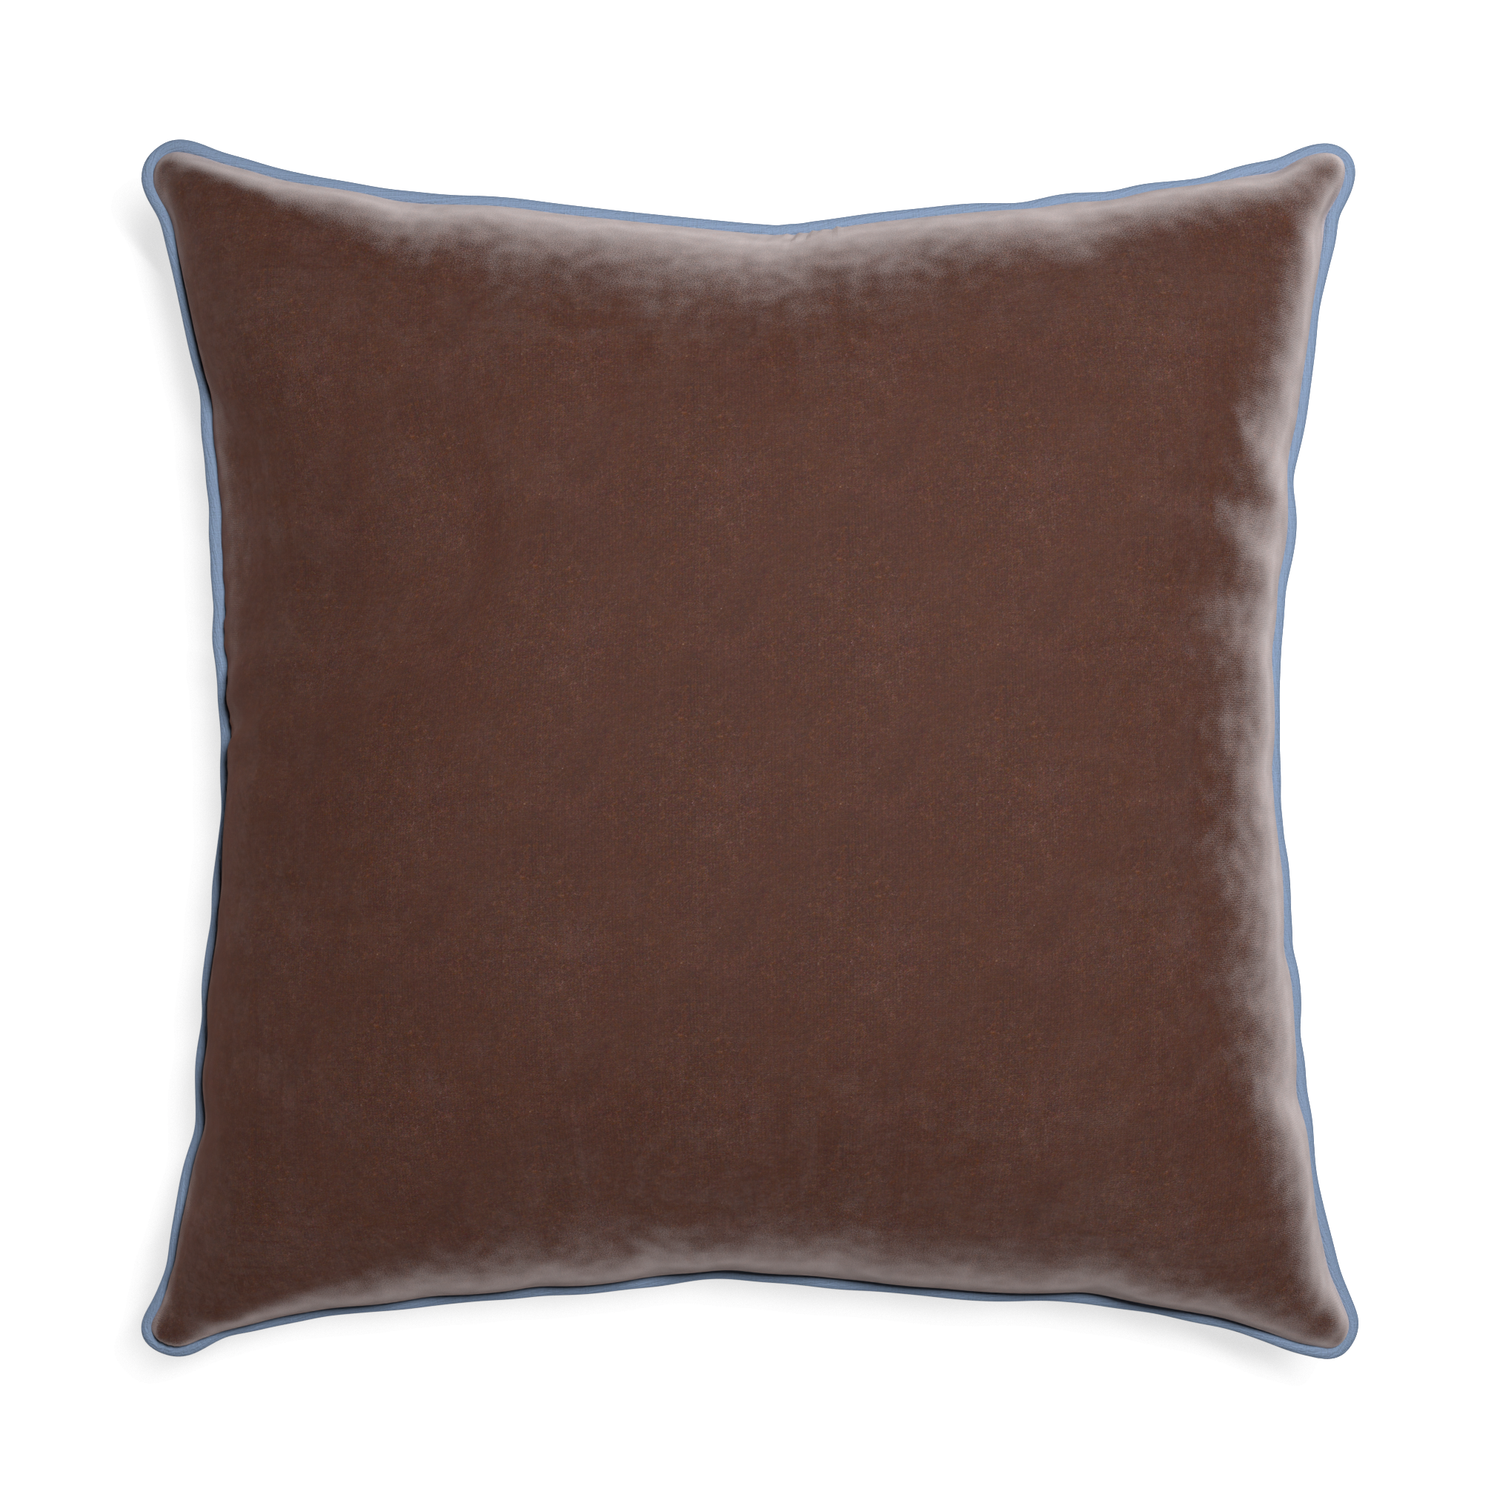 square brown velvet pillow with sky blue piping